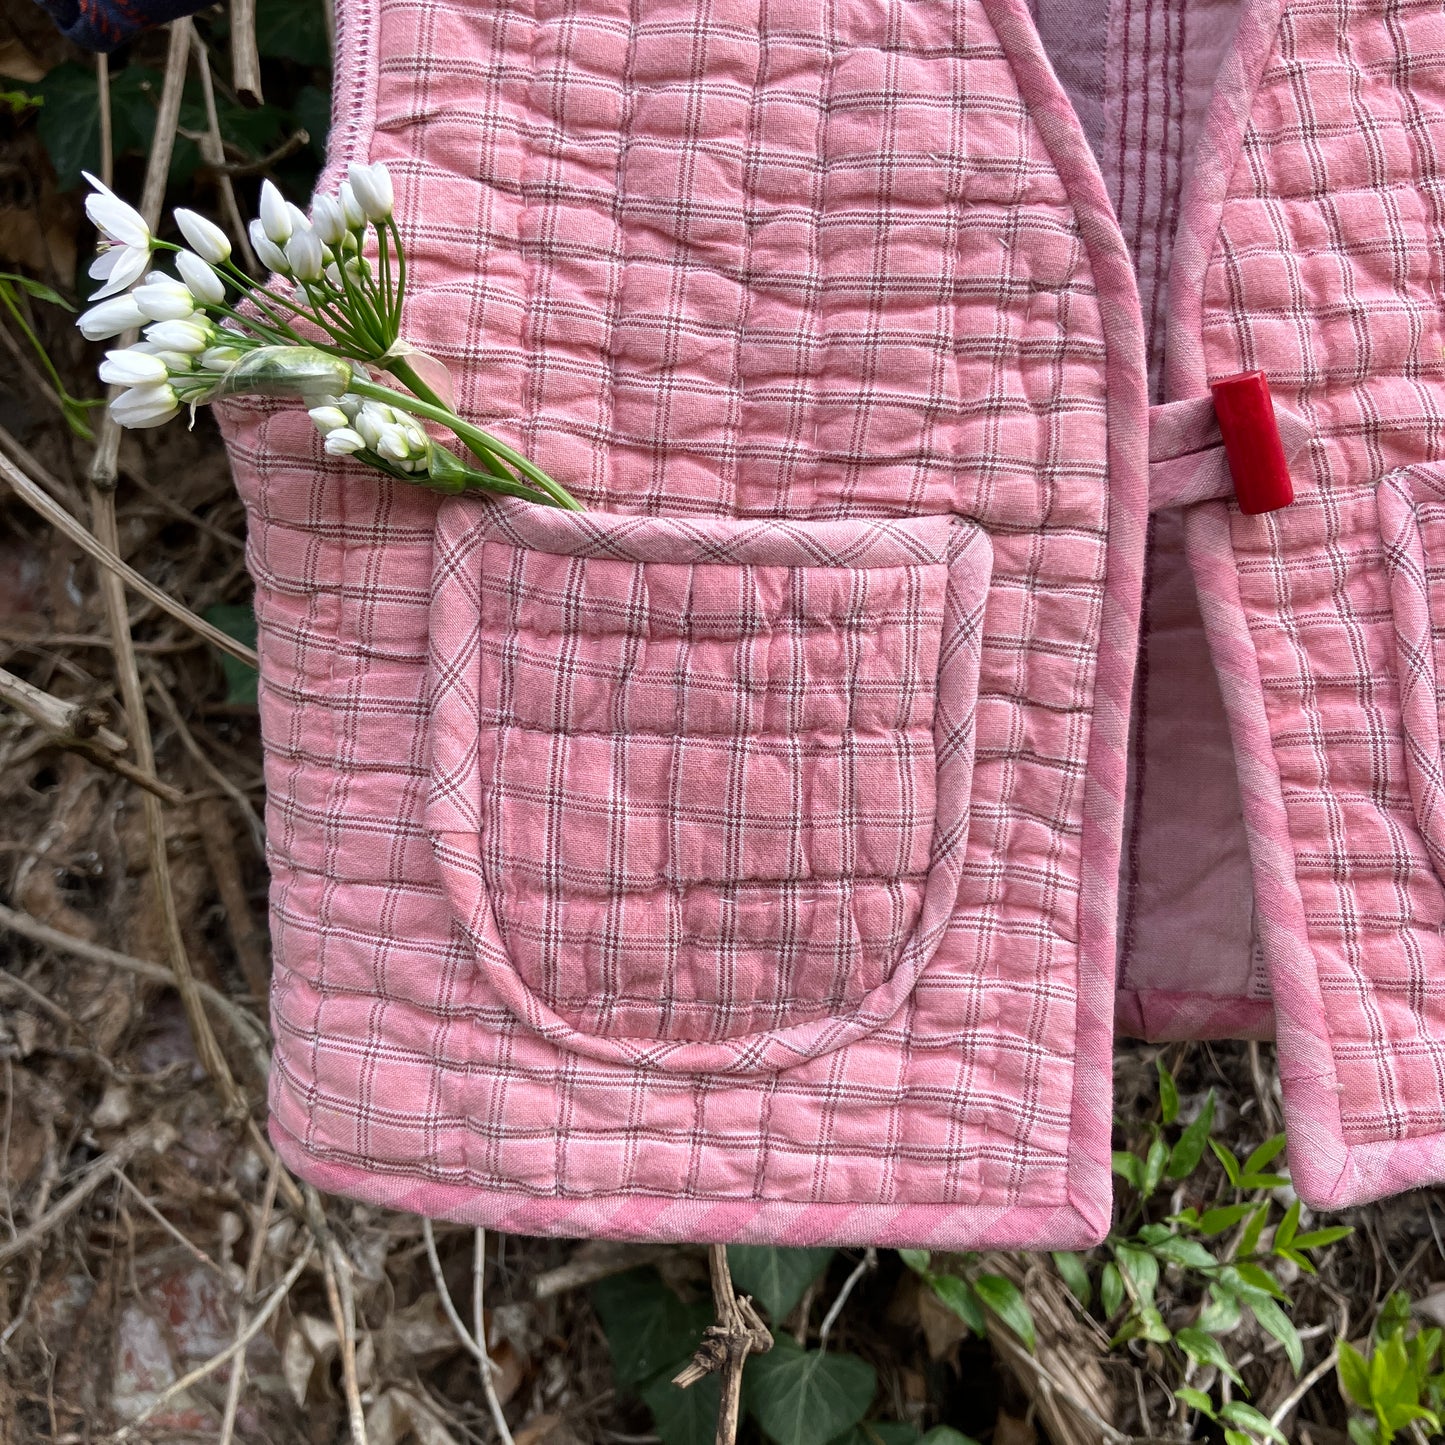 kids vest/gilet/waistcoat made from offcuts of a reclaimed pink quilt. Close-up of some wild flowers in one of the pockets